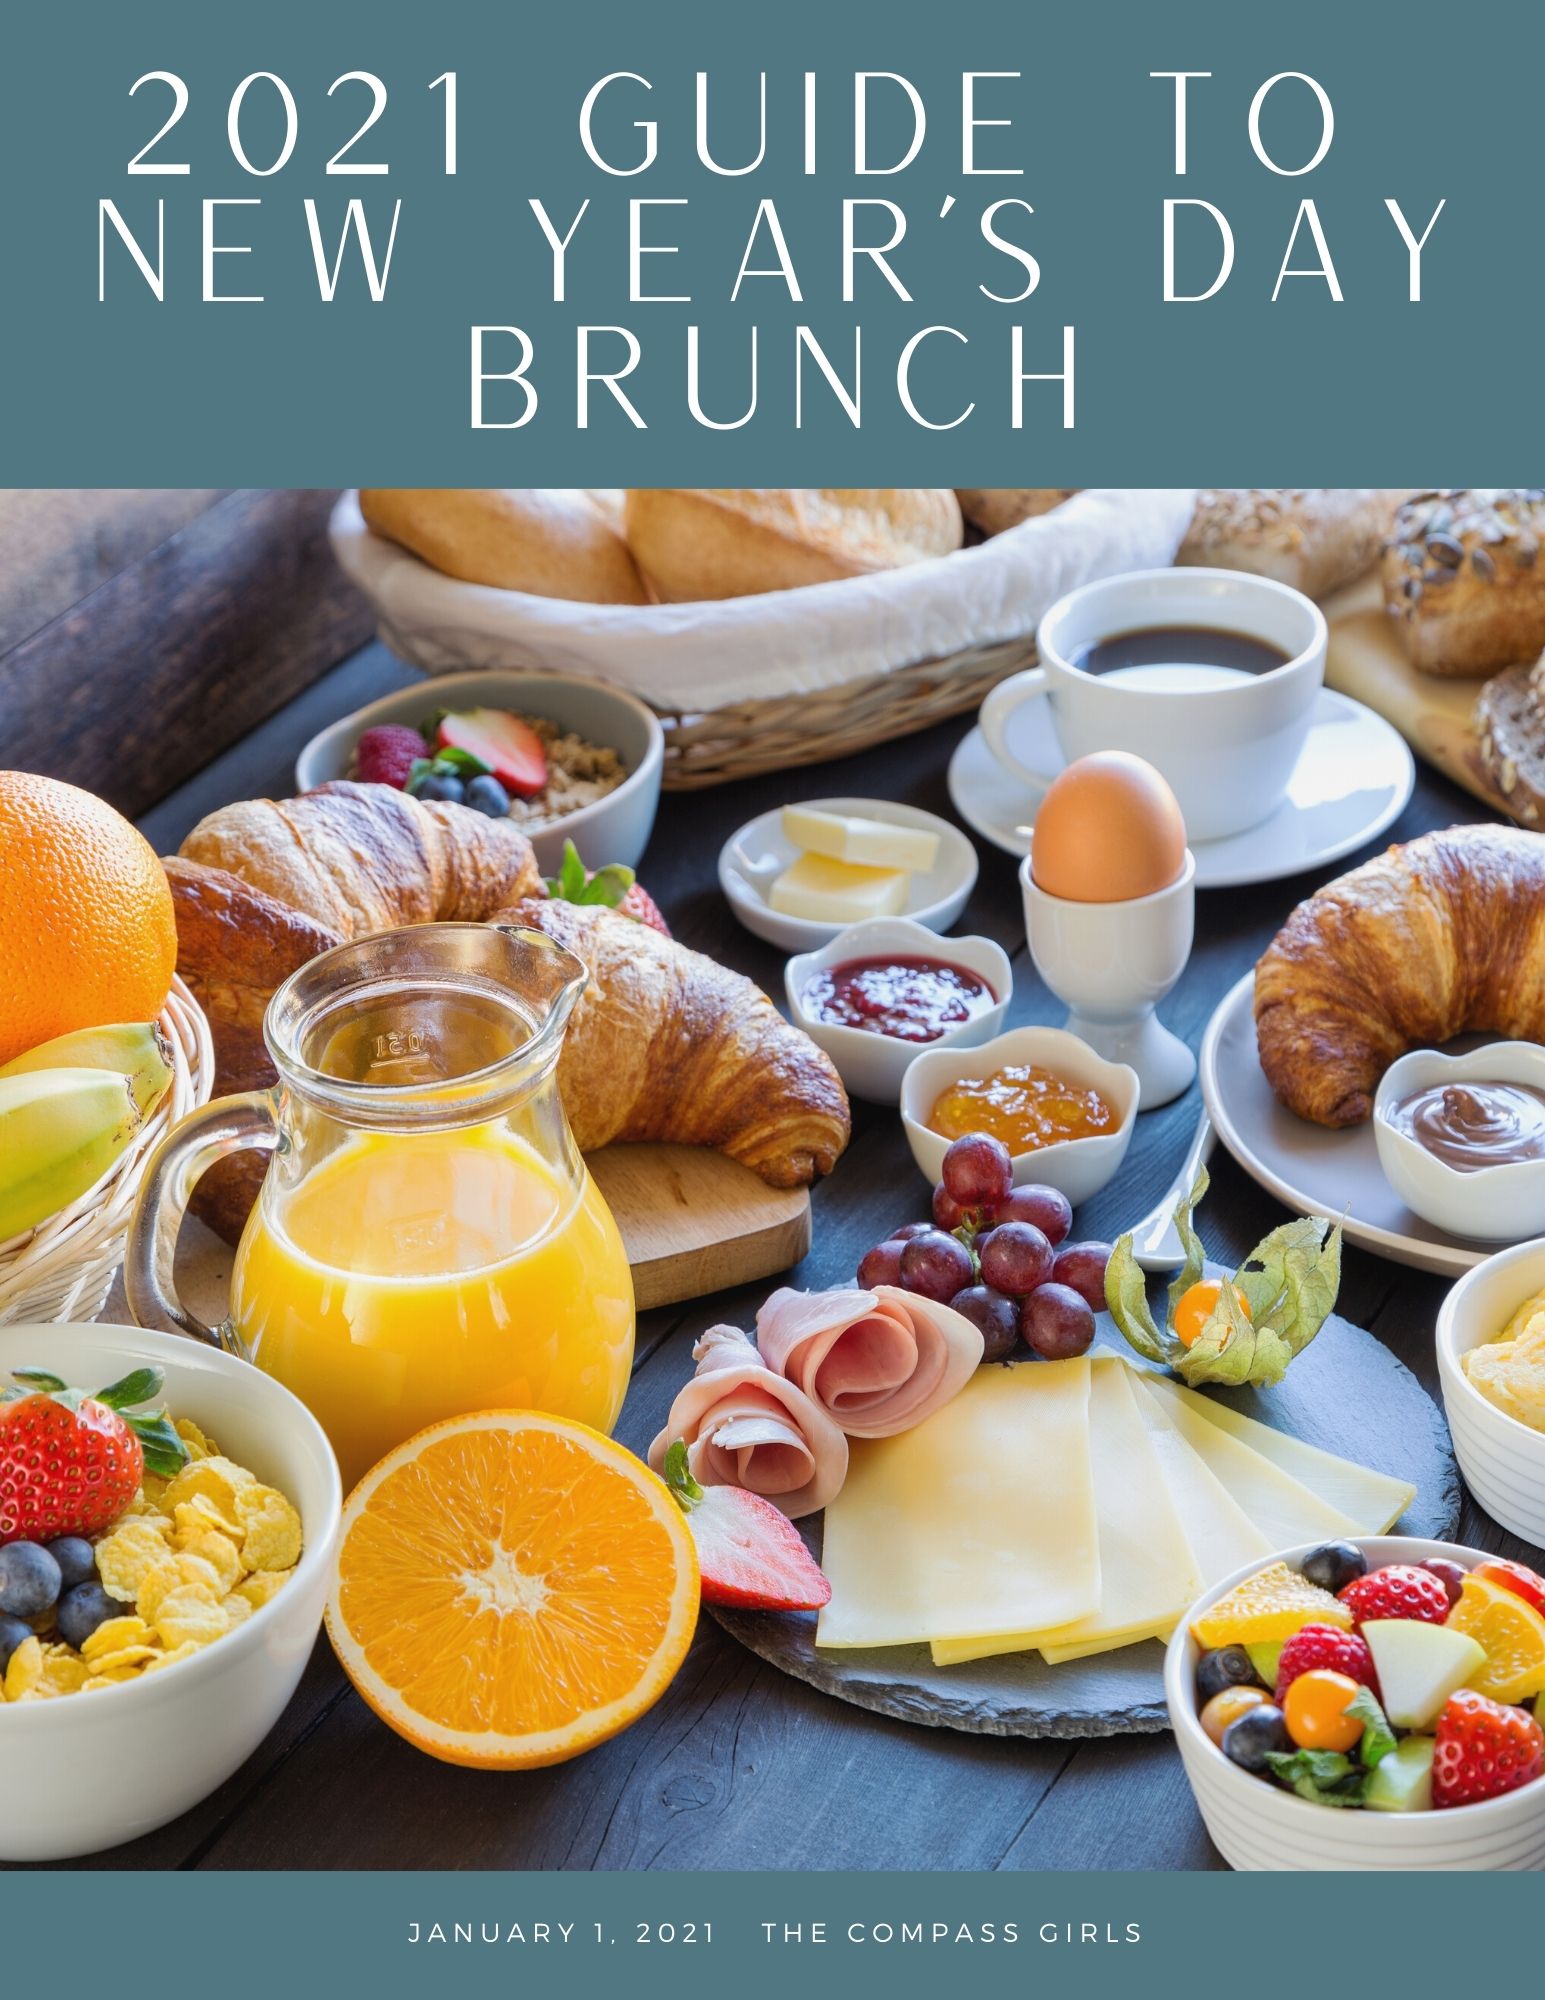 The 2021 Guide to New Year’s Brunch Salty and Stylish